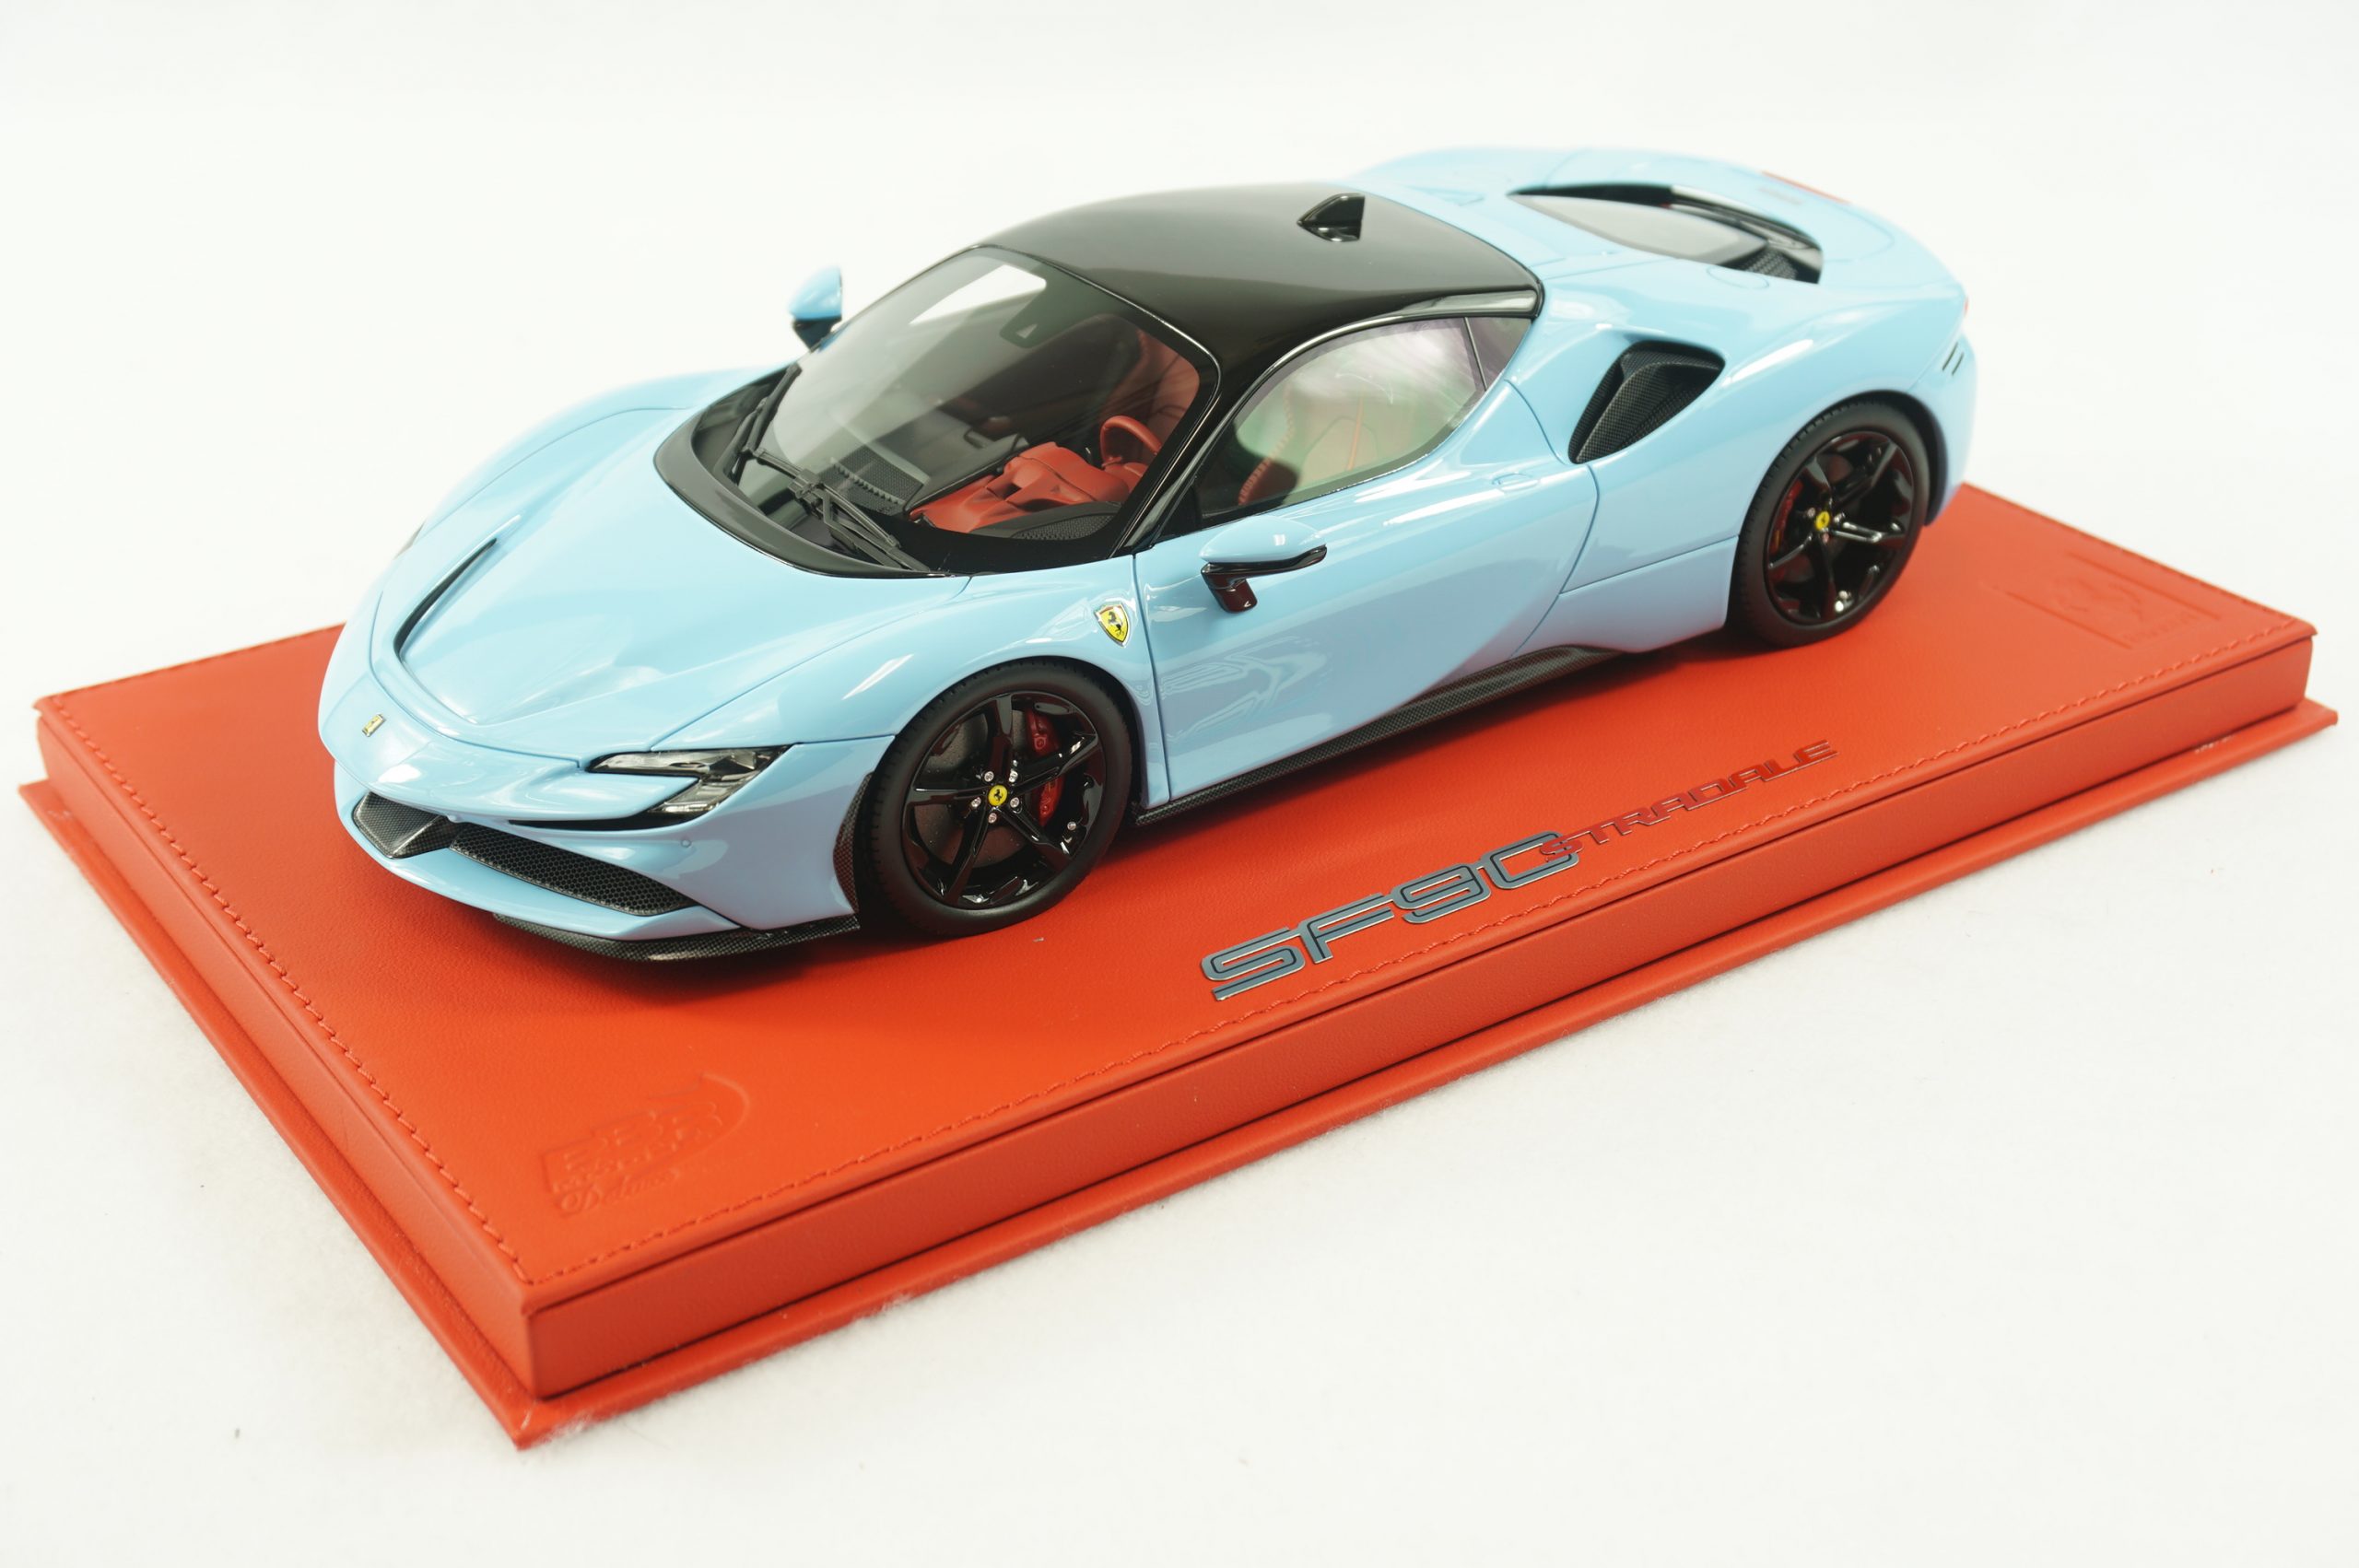 1/18 BBR Ferrari sf90 Stradale in color azzurro la plata with black roof  set on red deluxe leather base limited 15 pieces (RACELINE113)